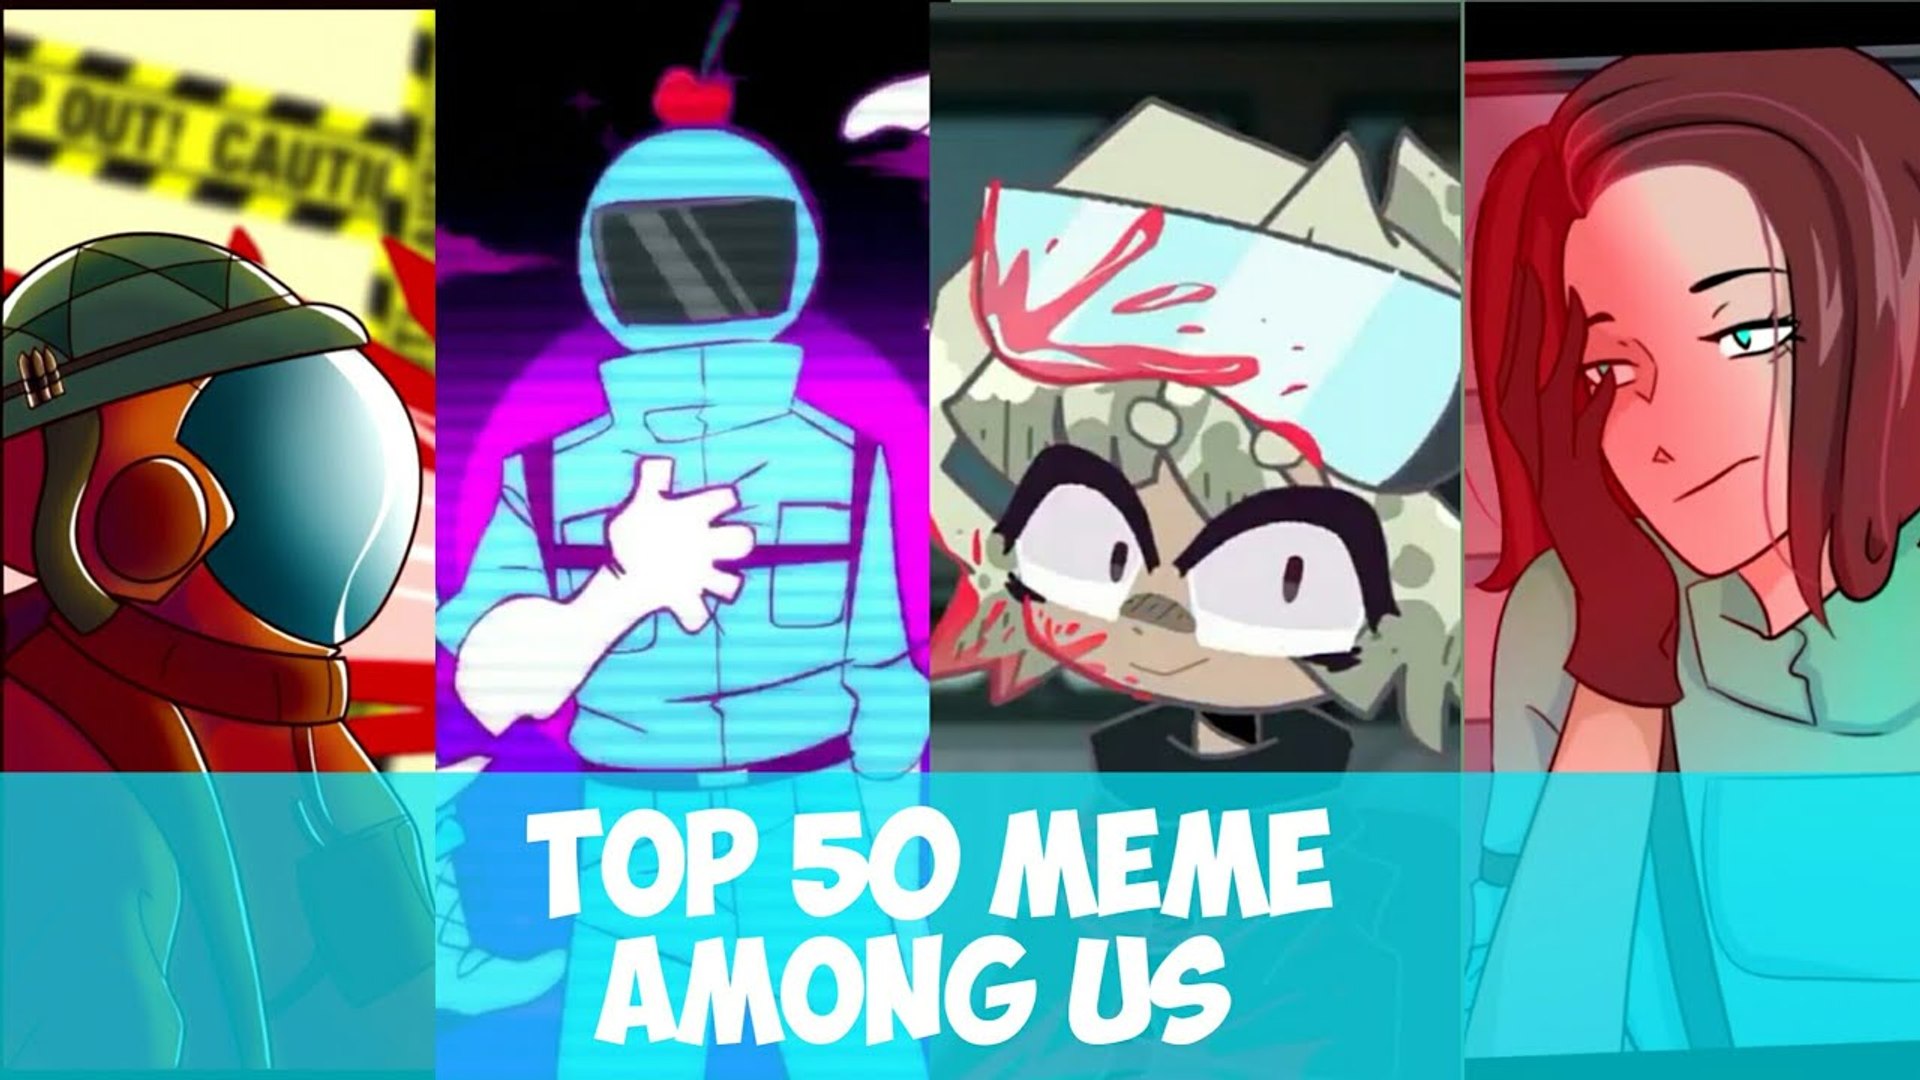 Among Us': All The Best Memes And Clips From 2020's Hottest Game